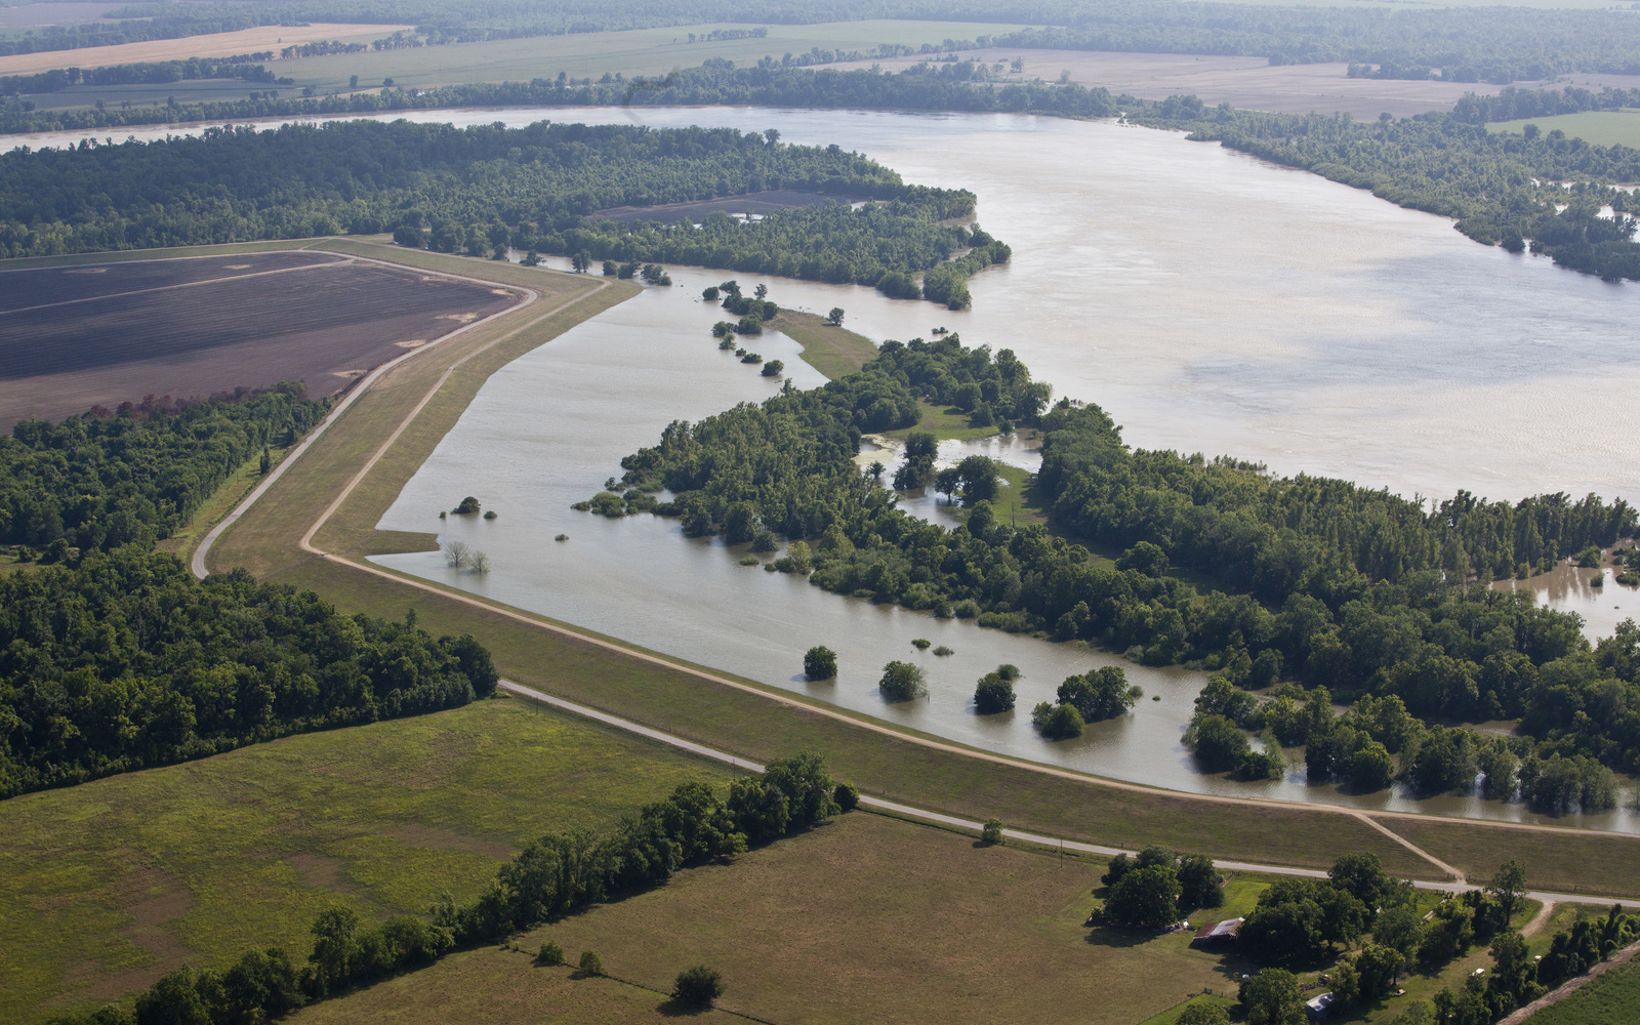 Atchafalaya River An aerial view of the flooded areas along the Atchafalaya River outside of Baton Rouge, LA.  © 2011 David Y. Lee